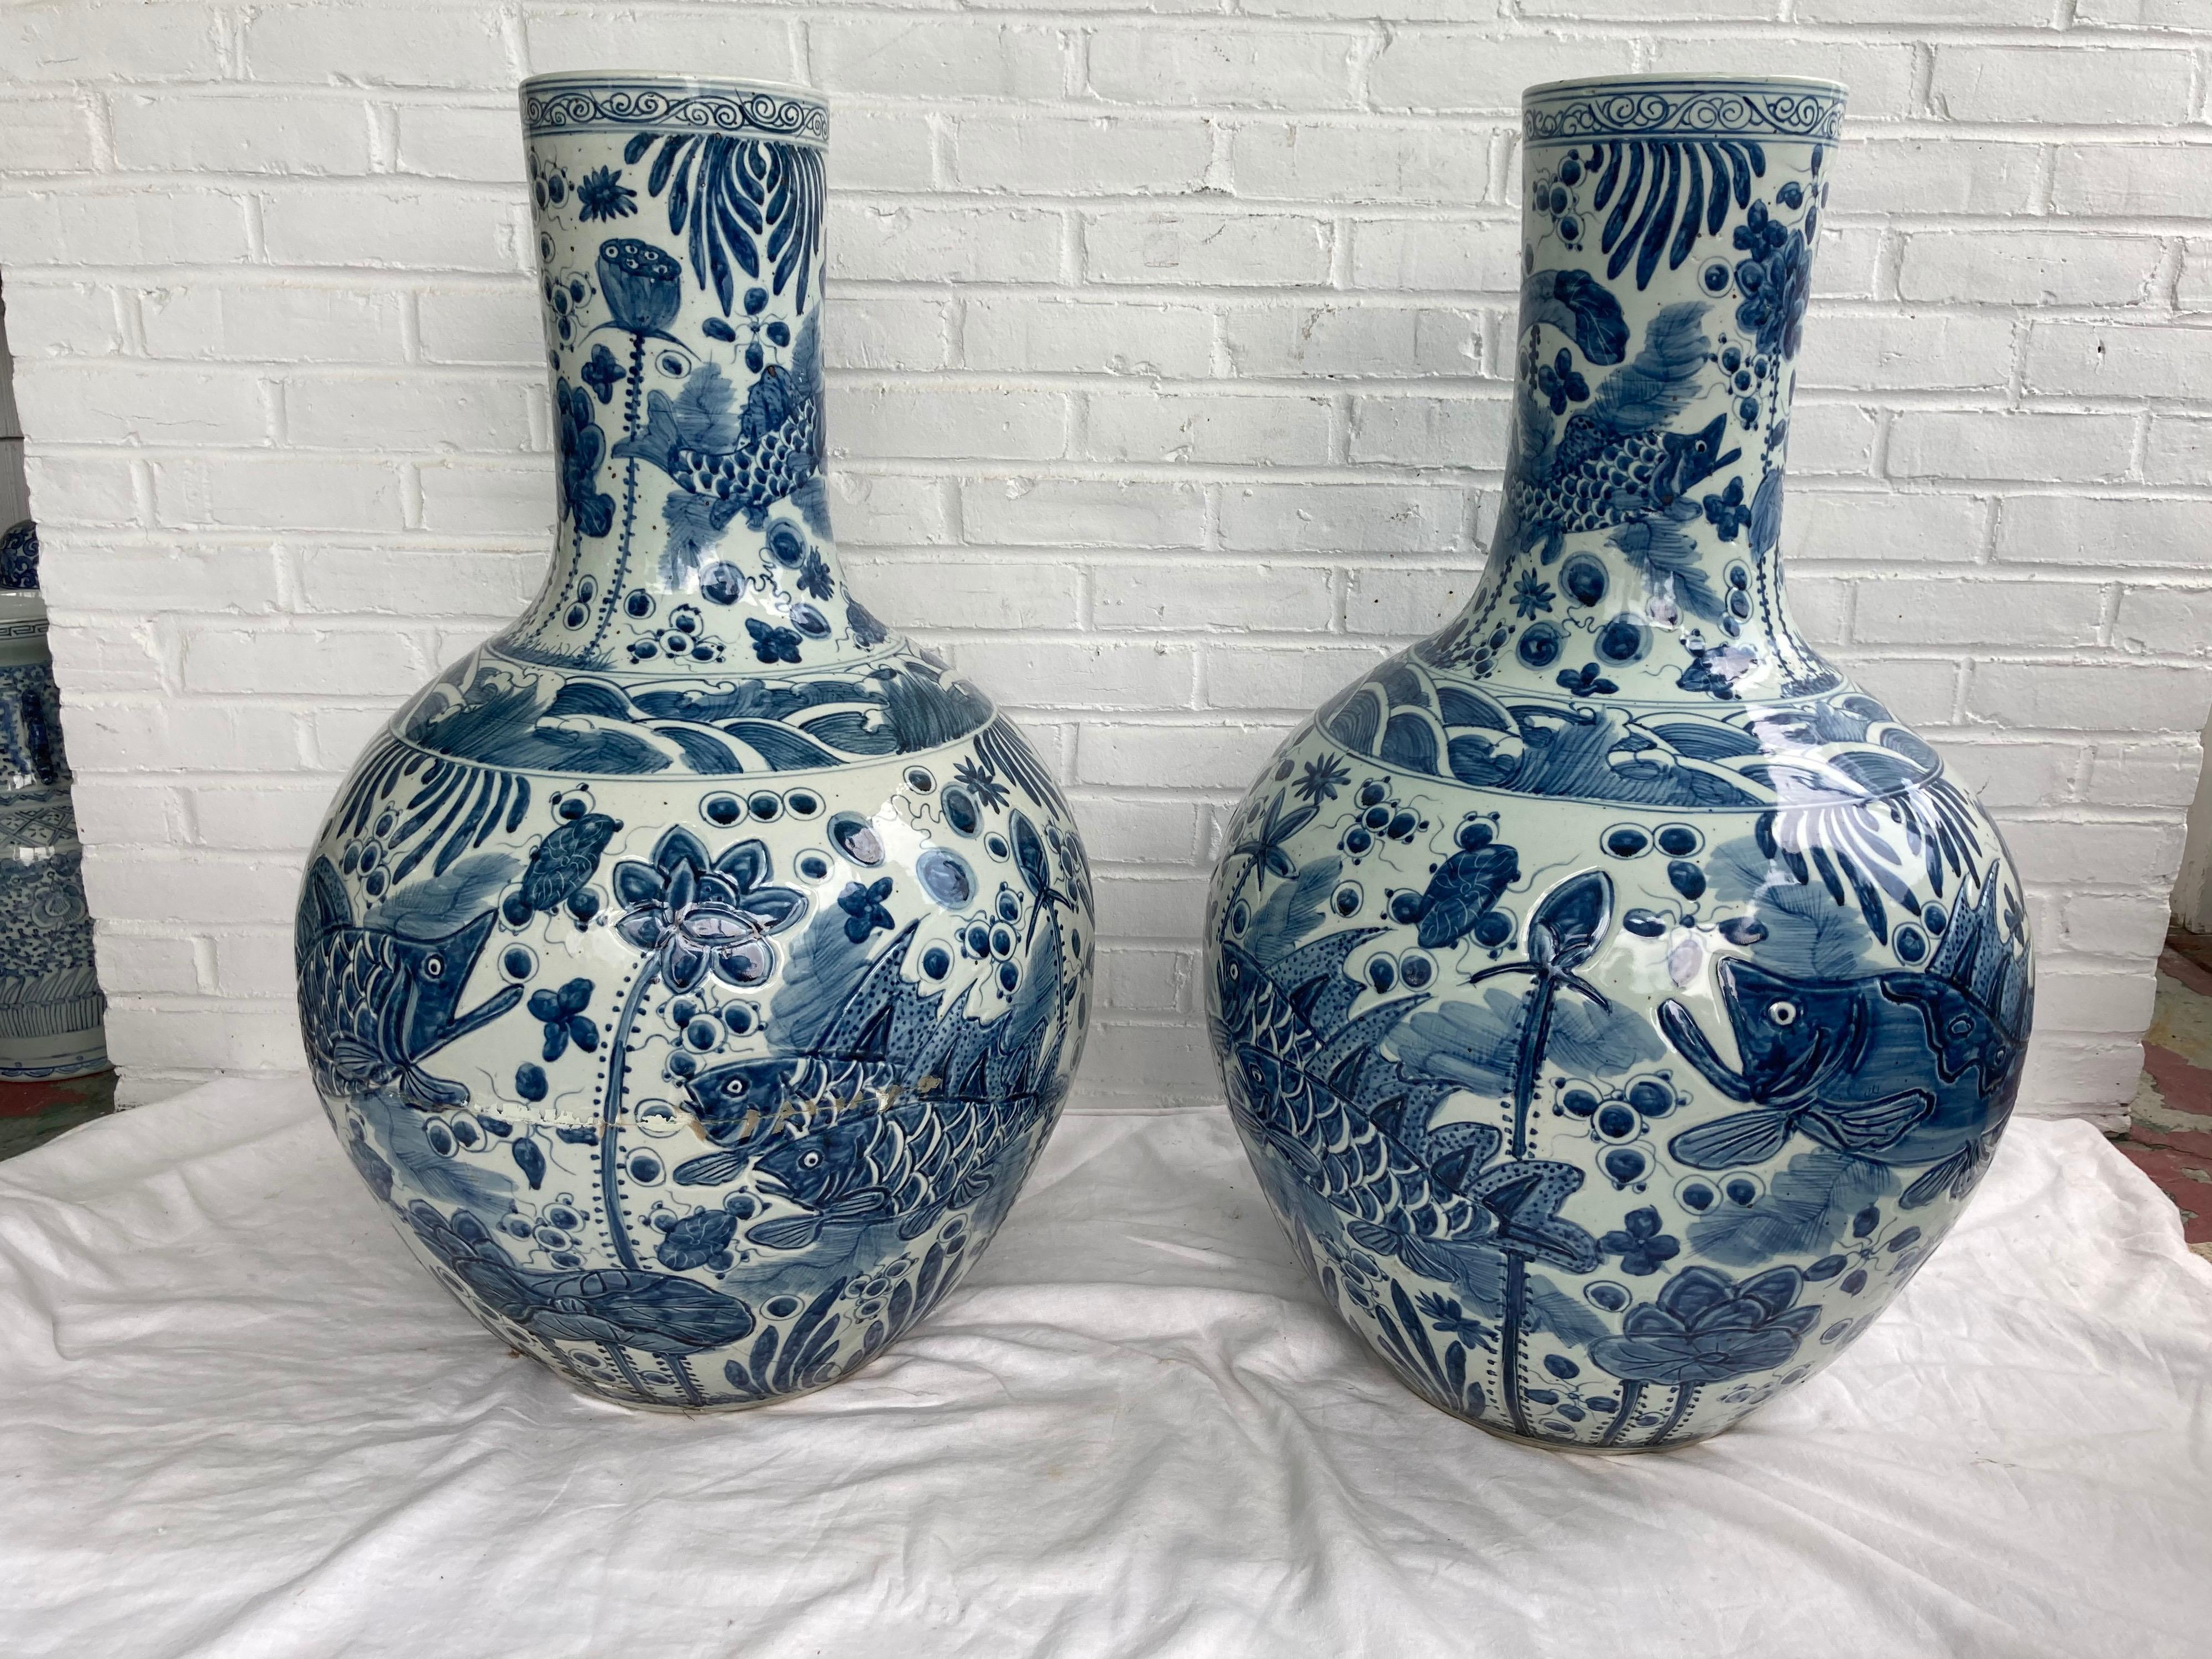 Very large pair of Chinese blue and white vases depicting fish... one with cracked base and repair work.... the other in great condition.... the pair is priced as a pair and priced accordingly with one repaired.... but looks great if turned!